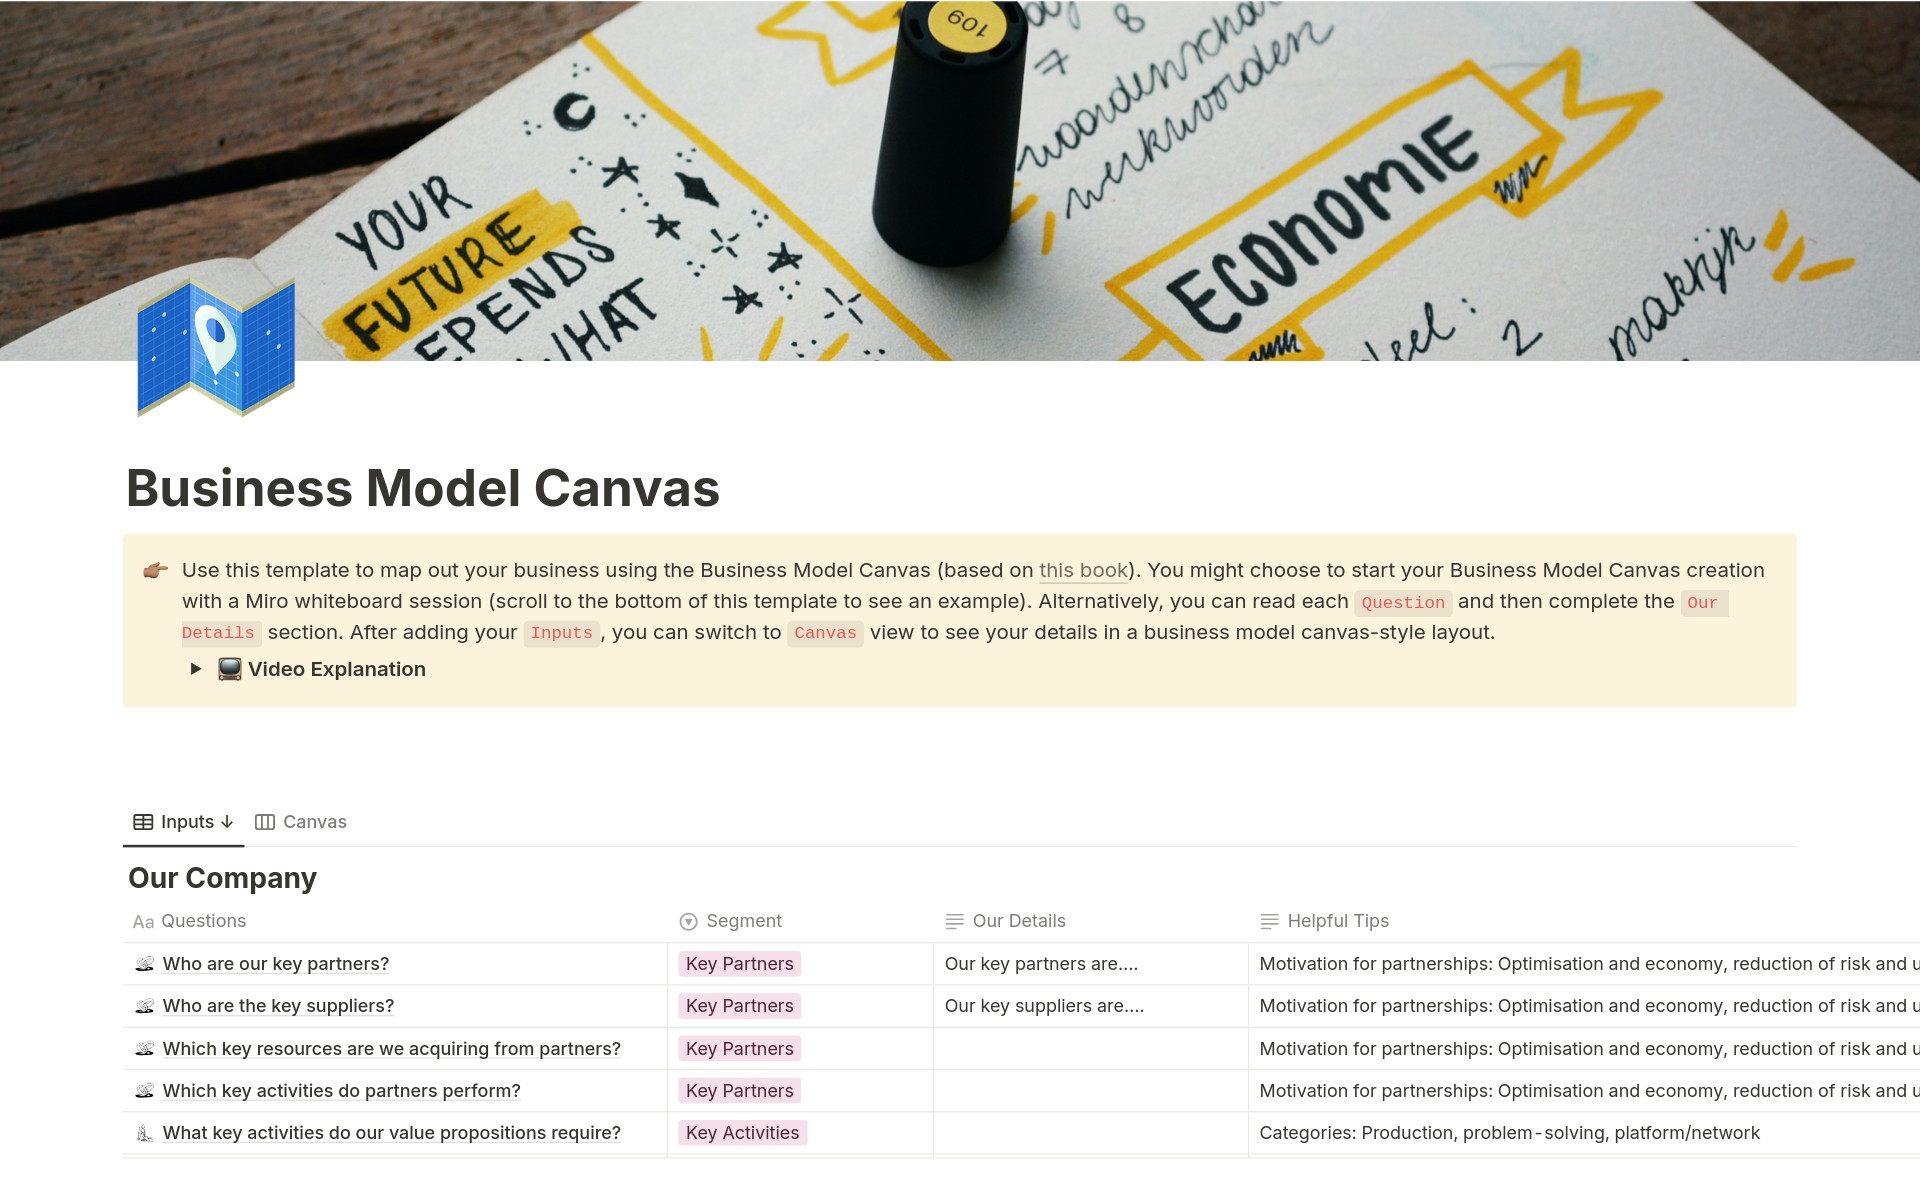 Use this template to map out your business using the Business Model Canvas